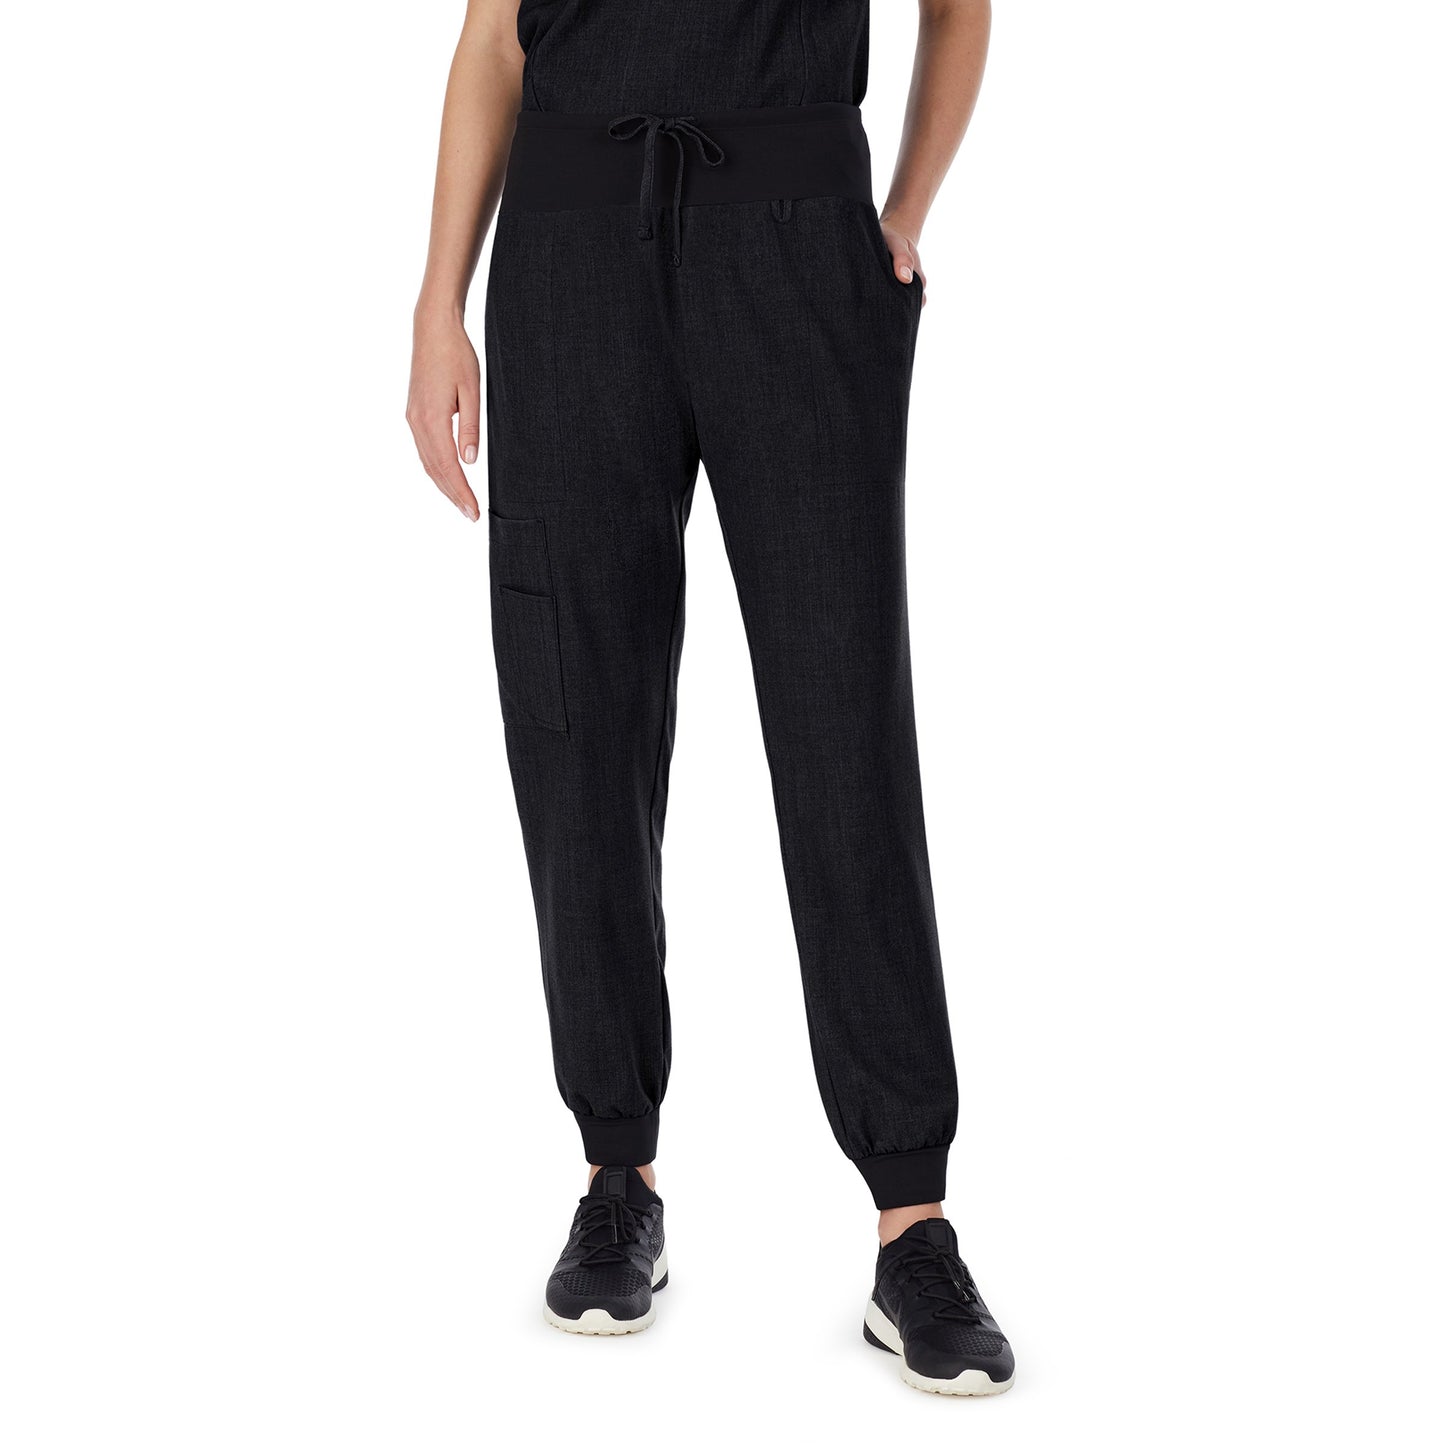 Black;Model is wearing size S. She is 5’9”, Bust 32”, Waist 23", Hips 34.5”.@A lady wearing black scrub jogger pant.